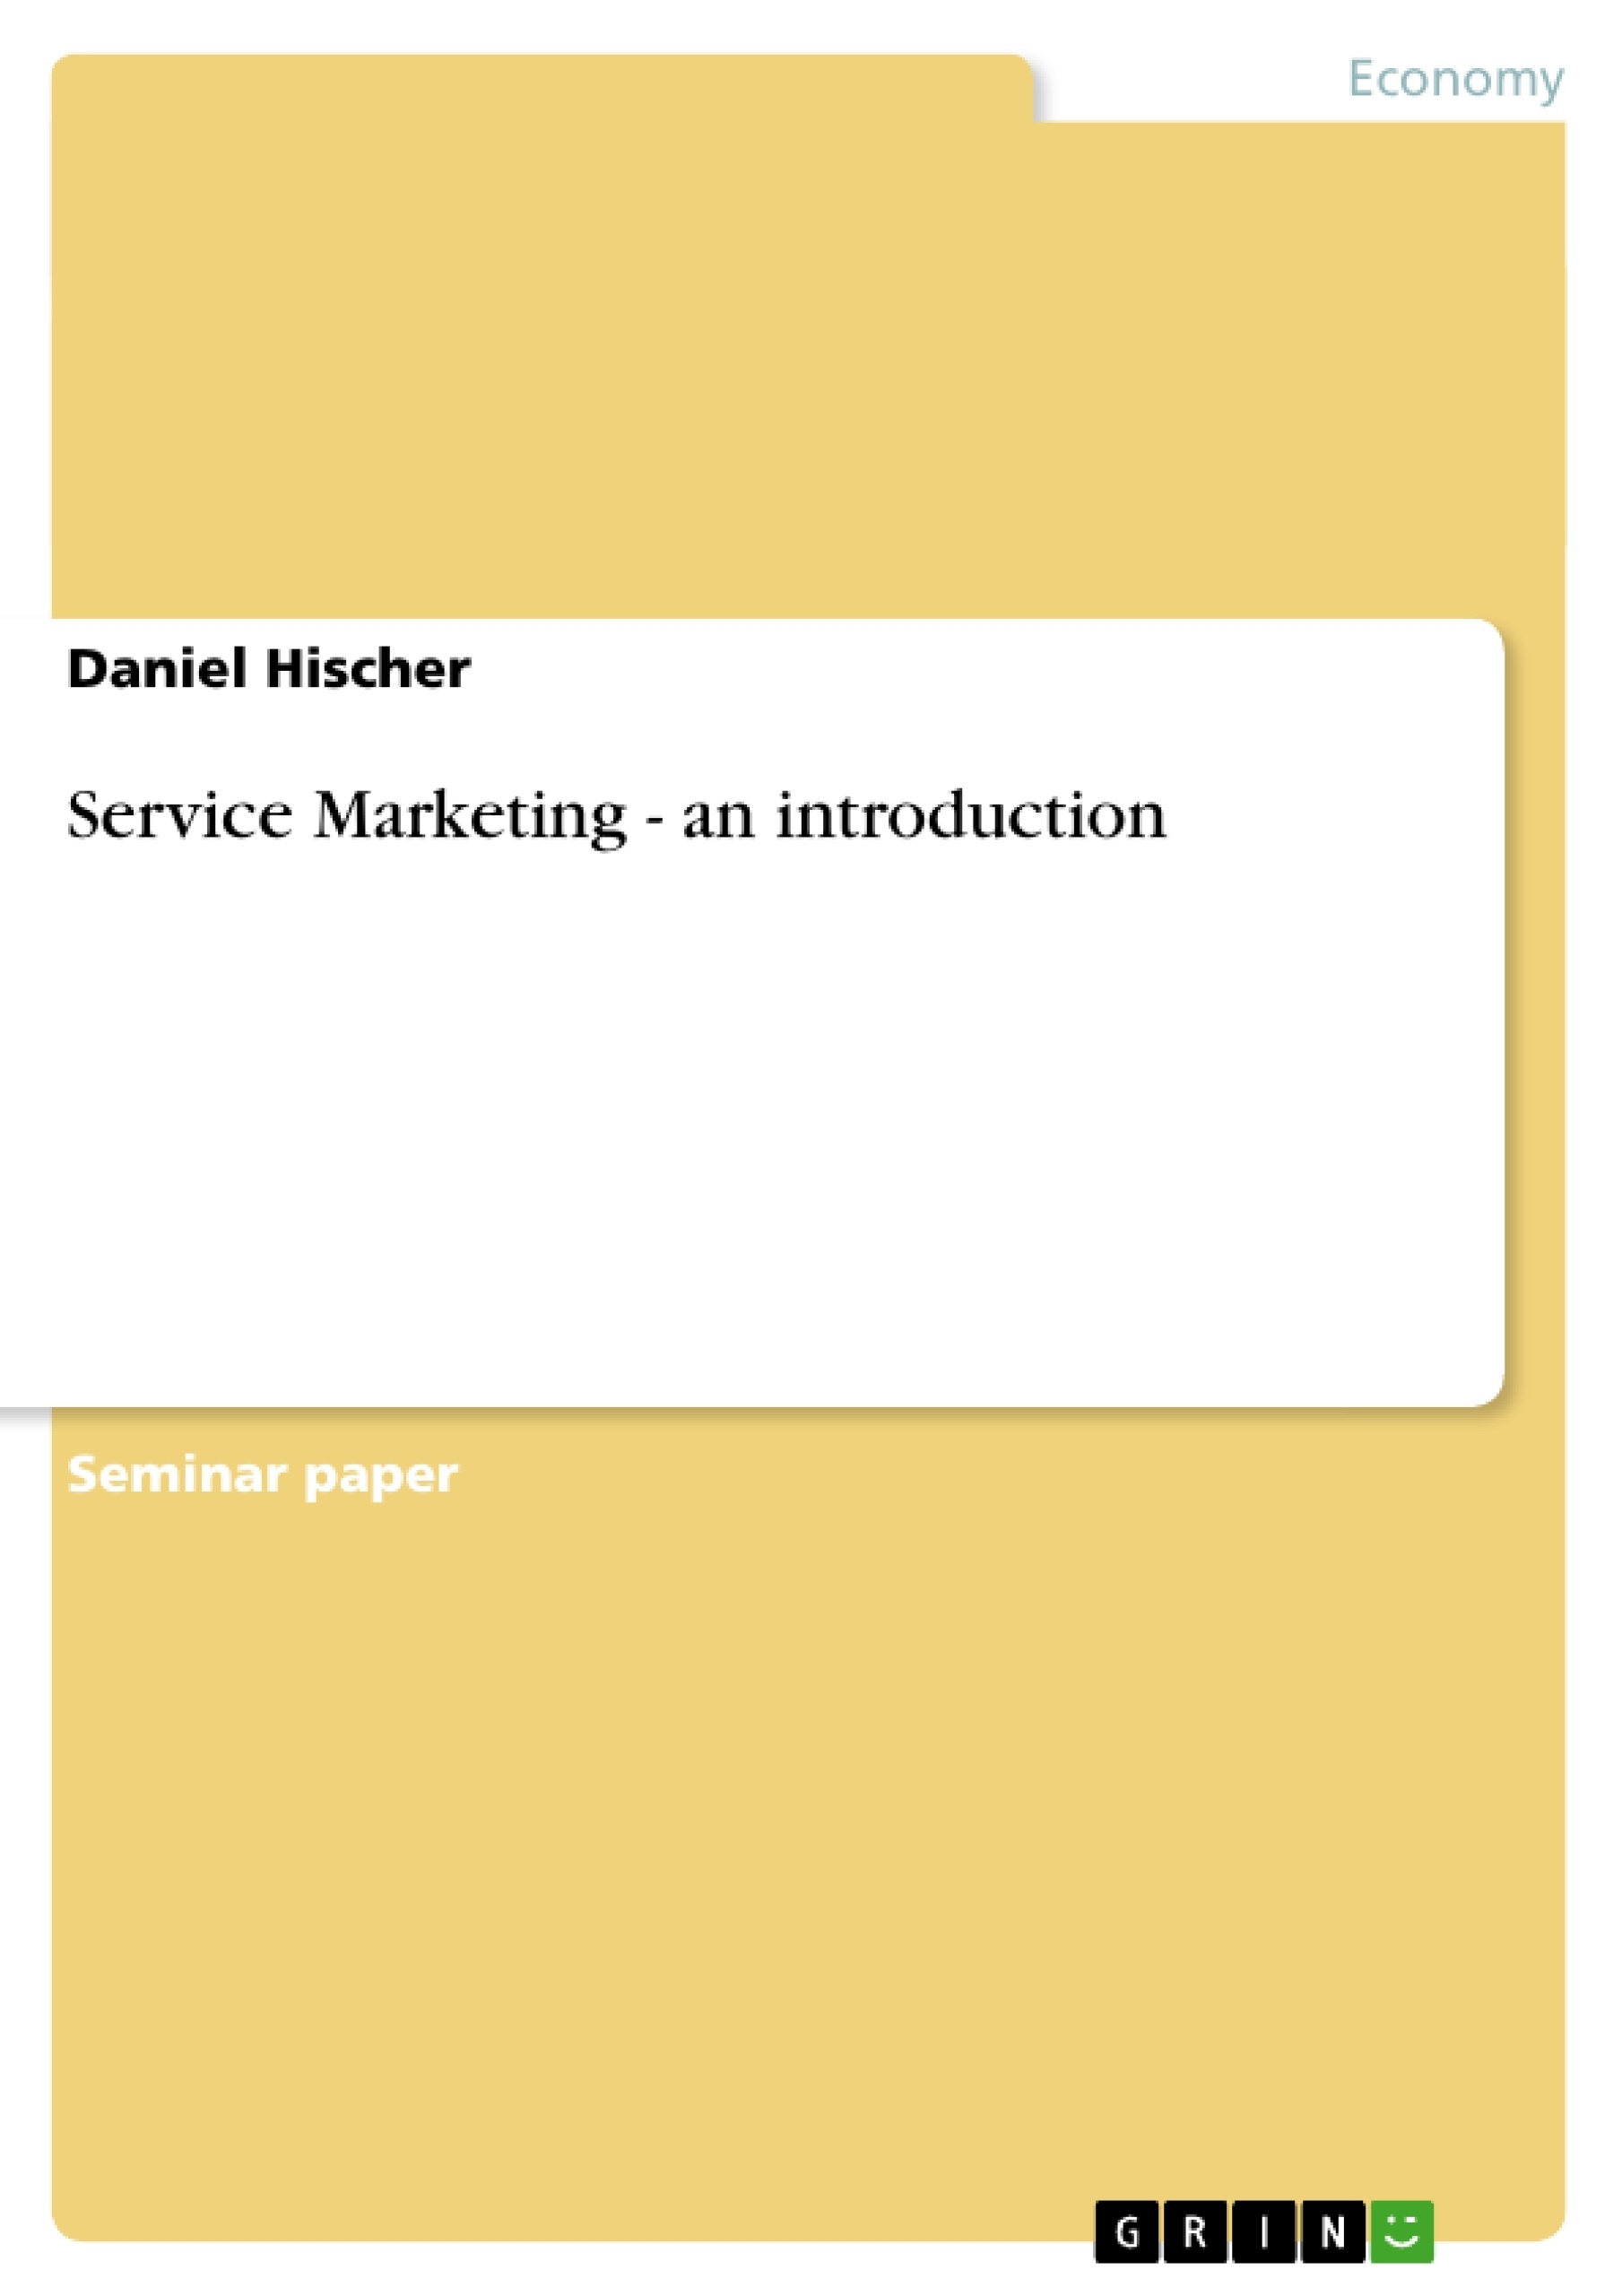 Title: Service Marketing - an introduction